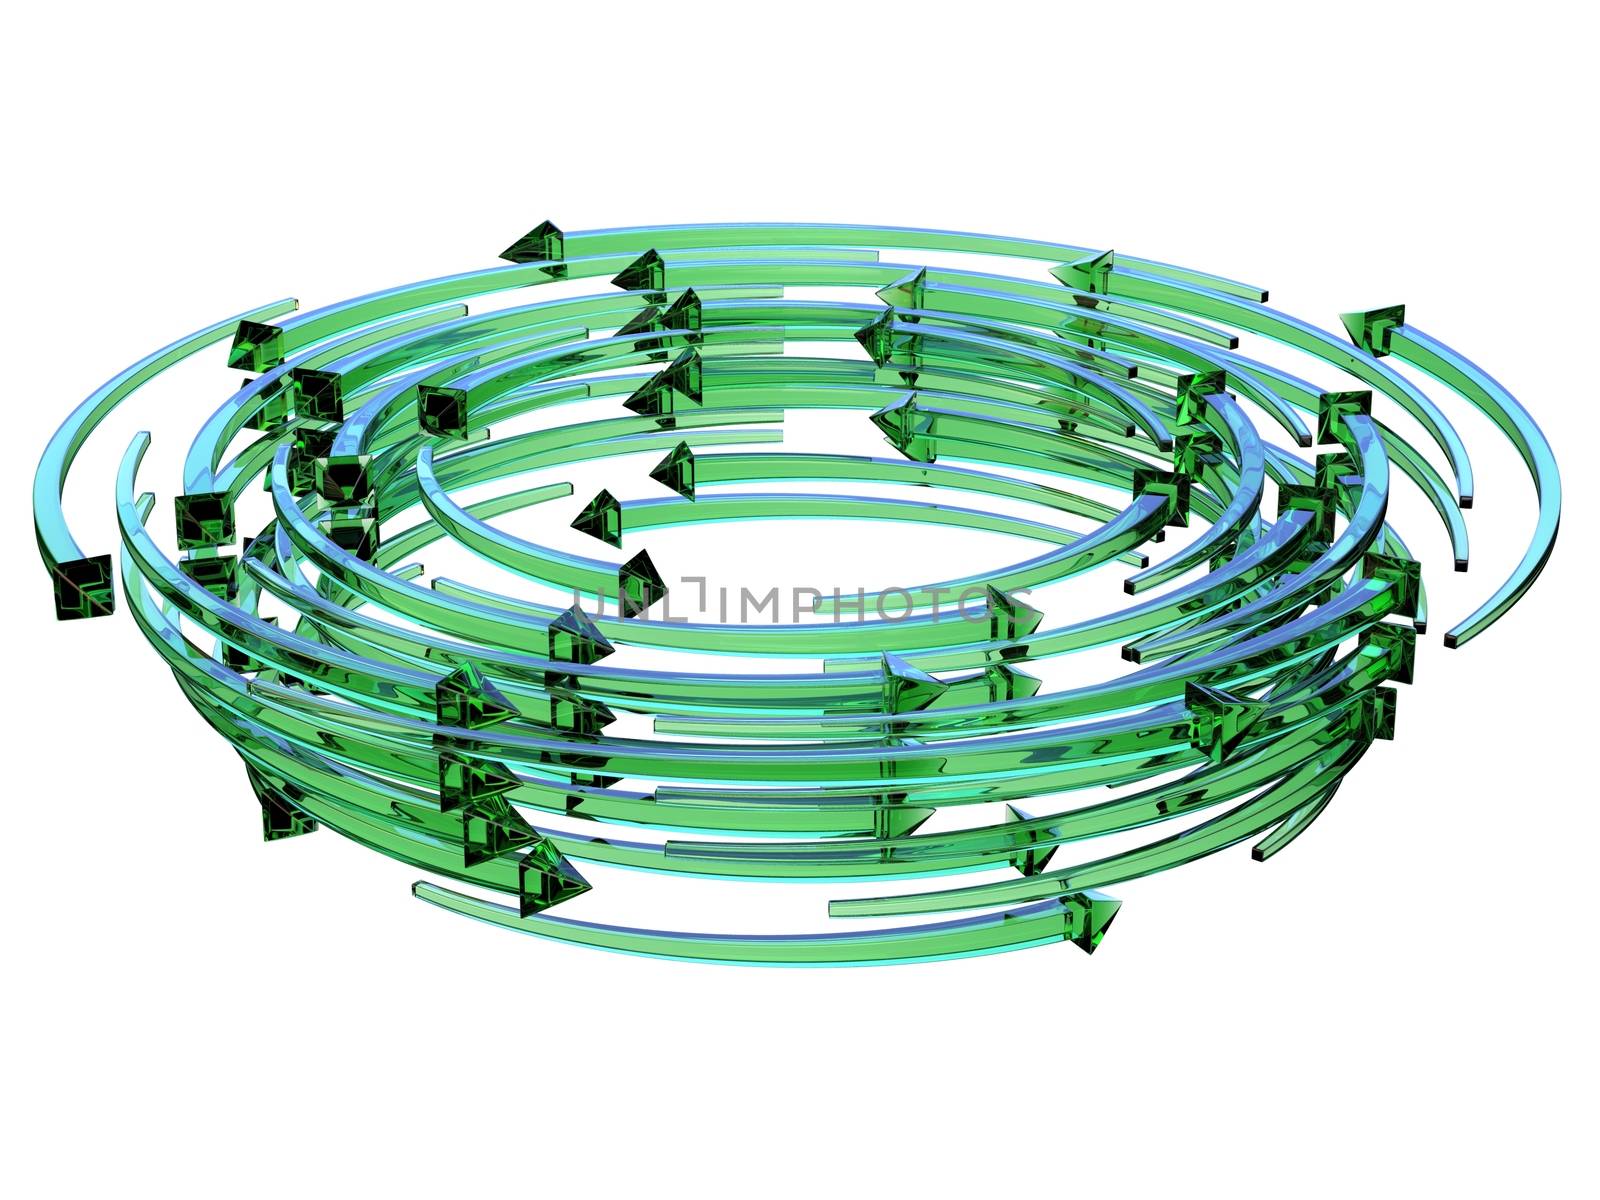 Green transparent arrows wreath 3D render illustration isolated on white background